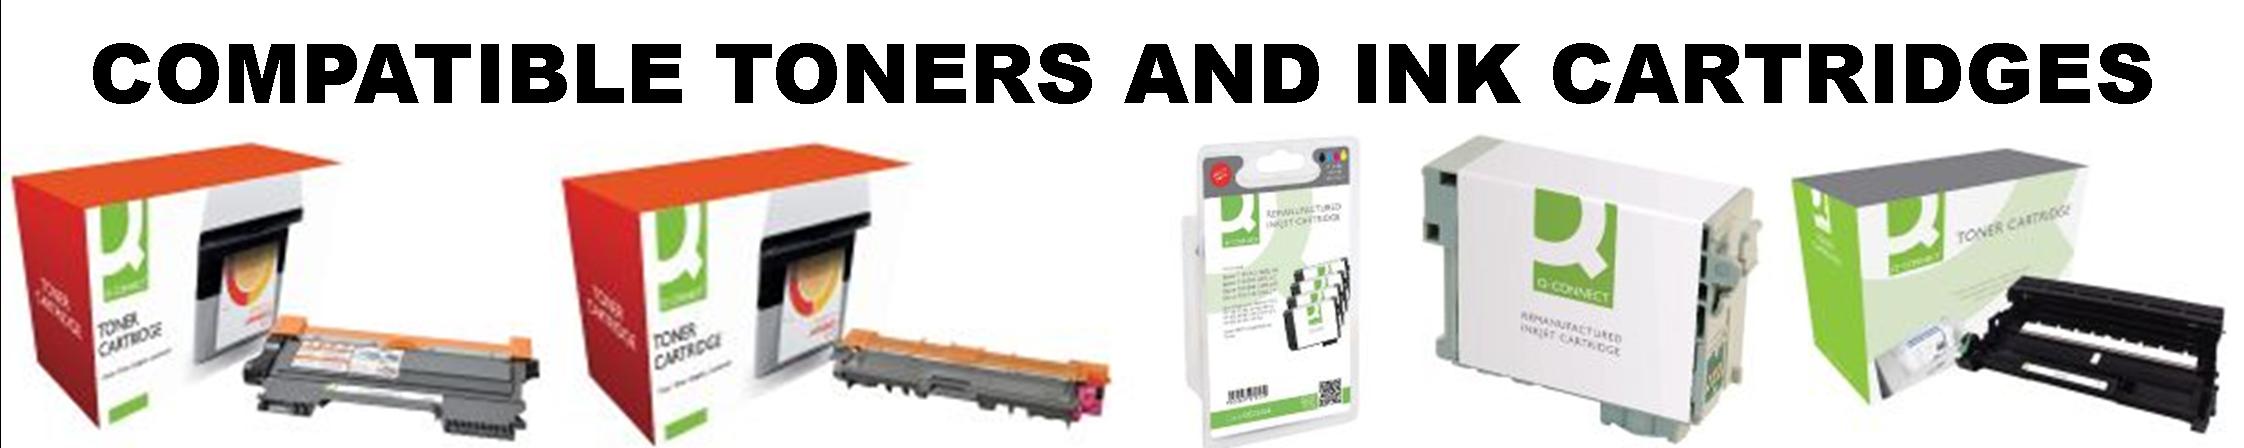 Toners and Compatible Cartridges